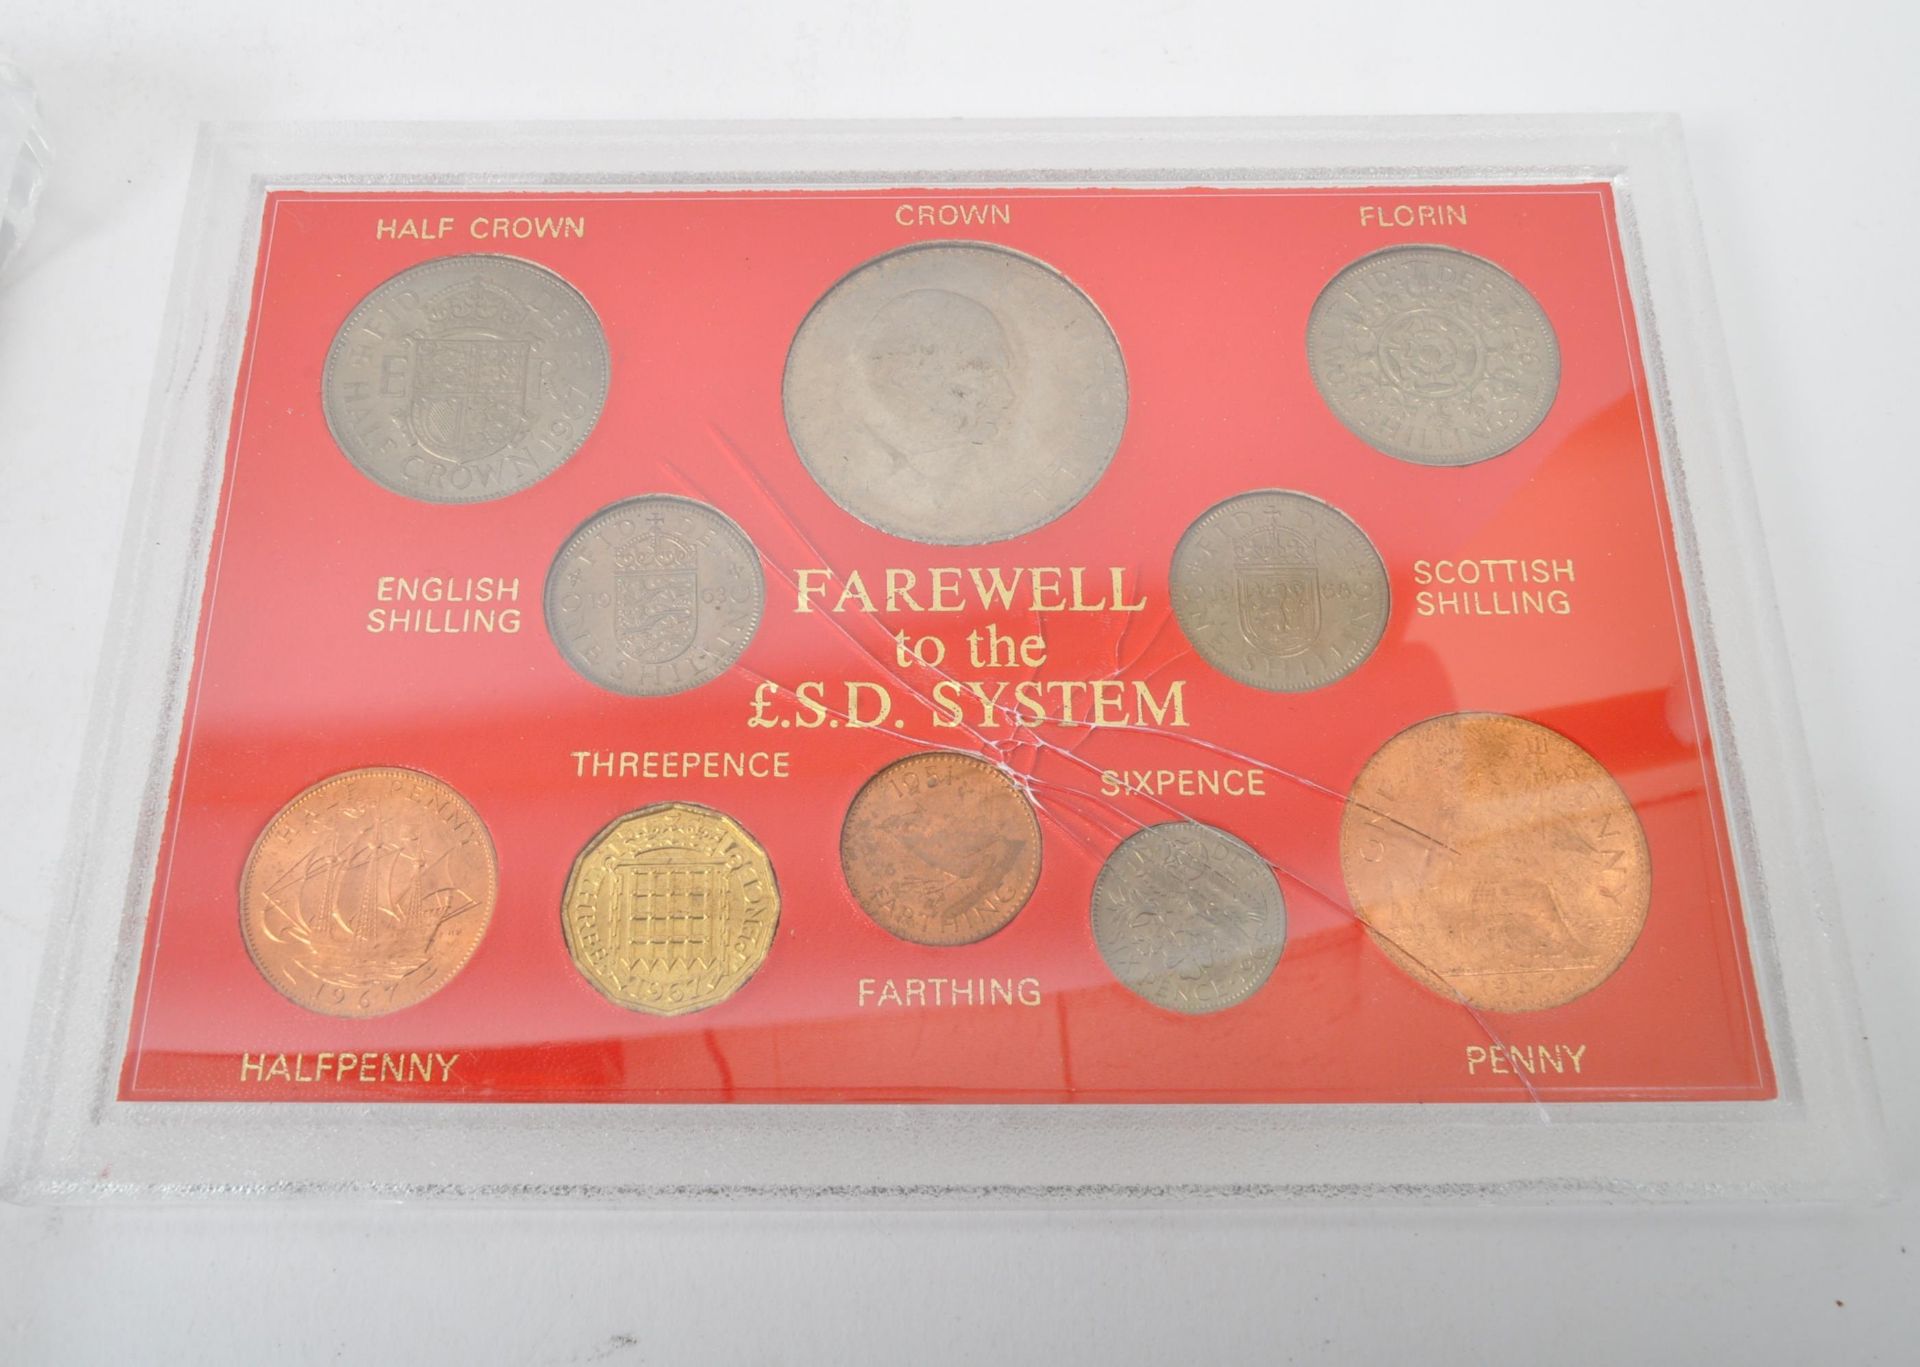 COLLECTION OF VINTAGE COMMEMORATIVE UK COIN SETS - Image 3 of 5